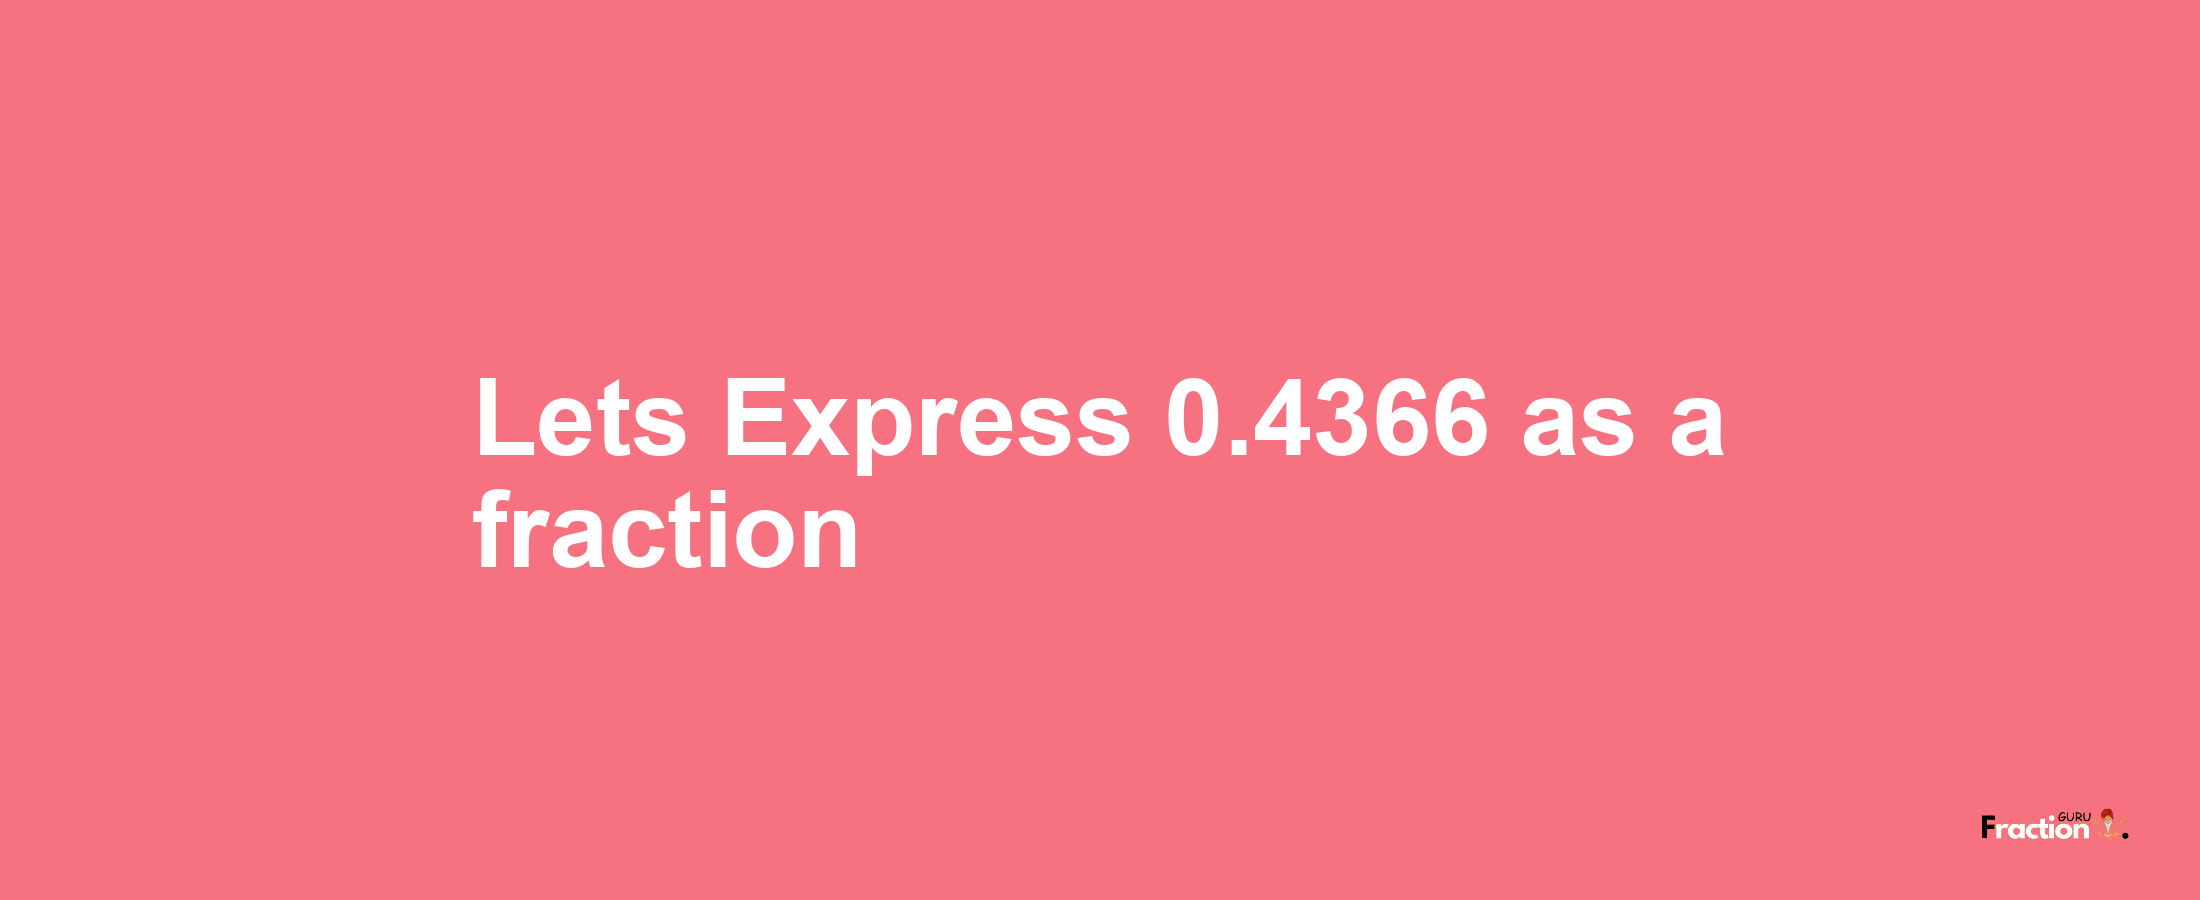 Lets Express 0.4366 as afraction